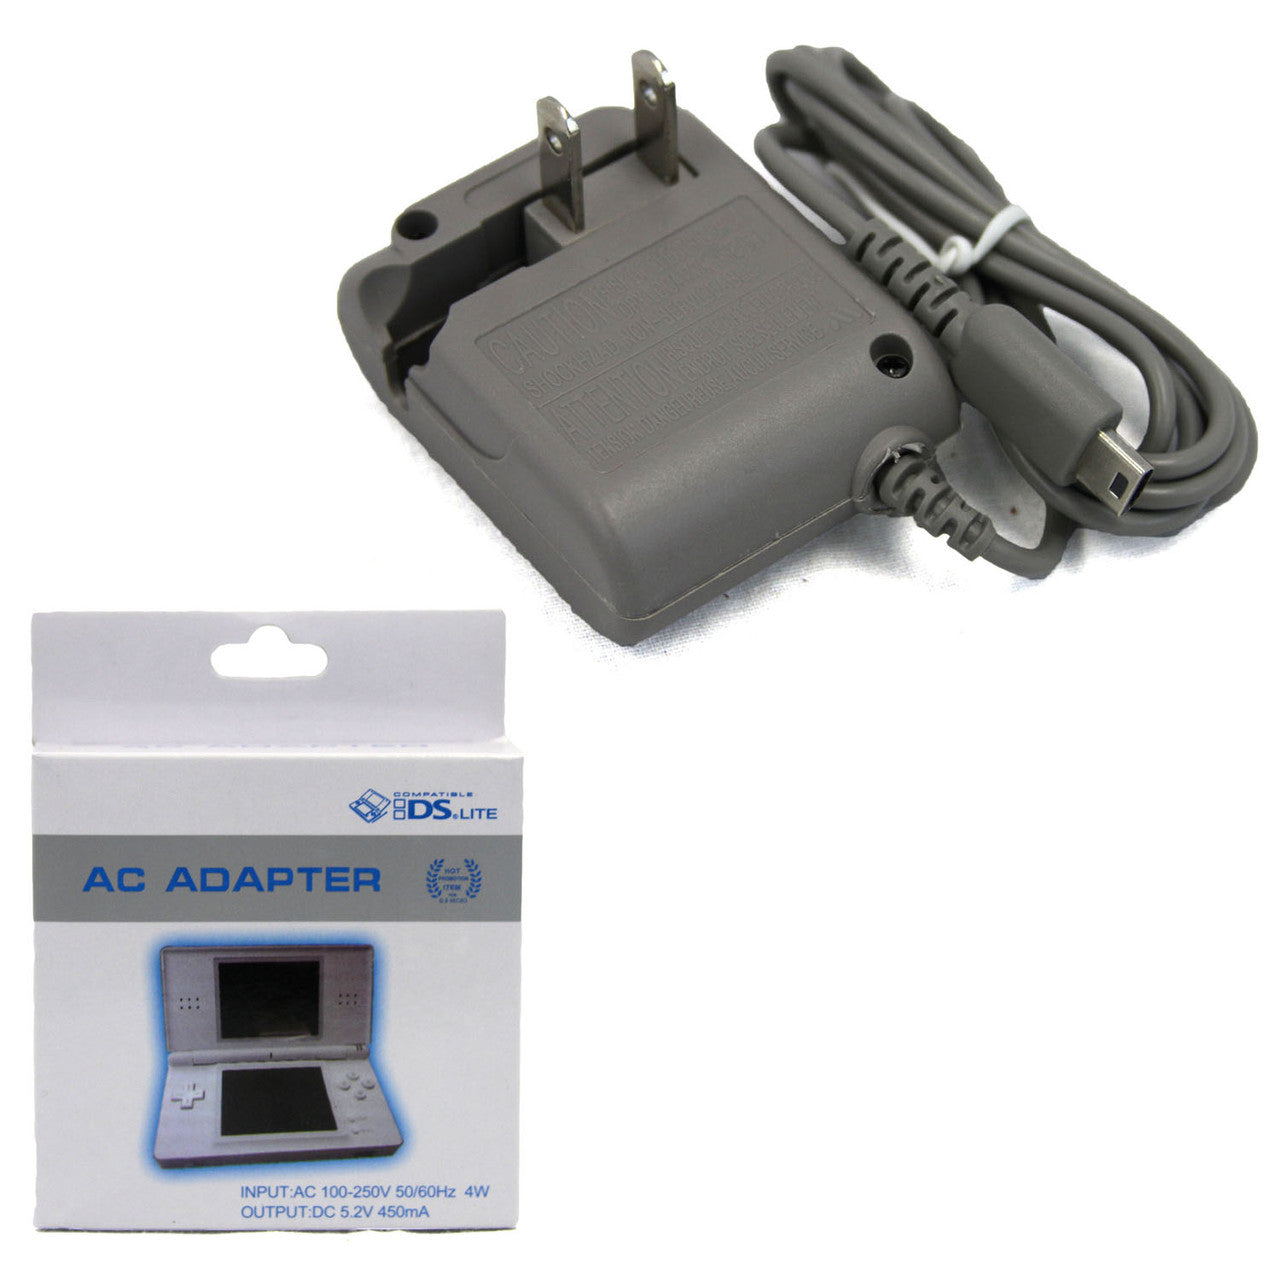 Nintendo DS Lite AC Adapter 110-220V (3rd Party)